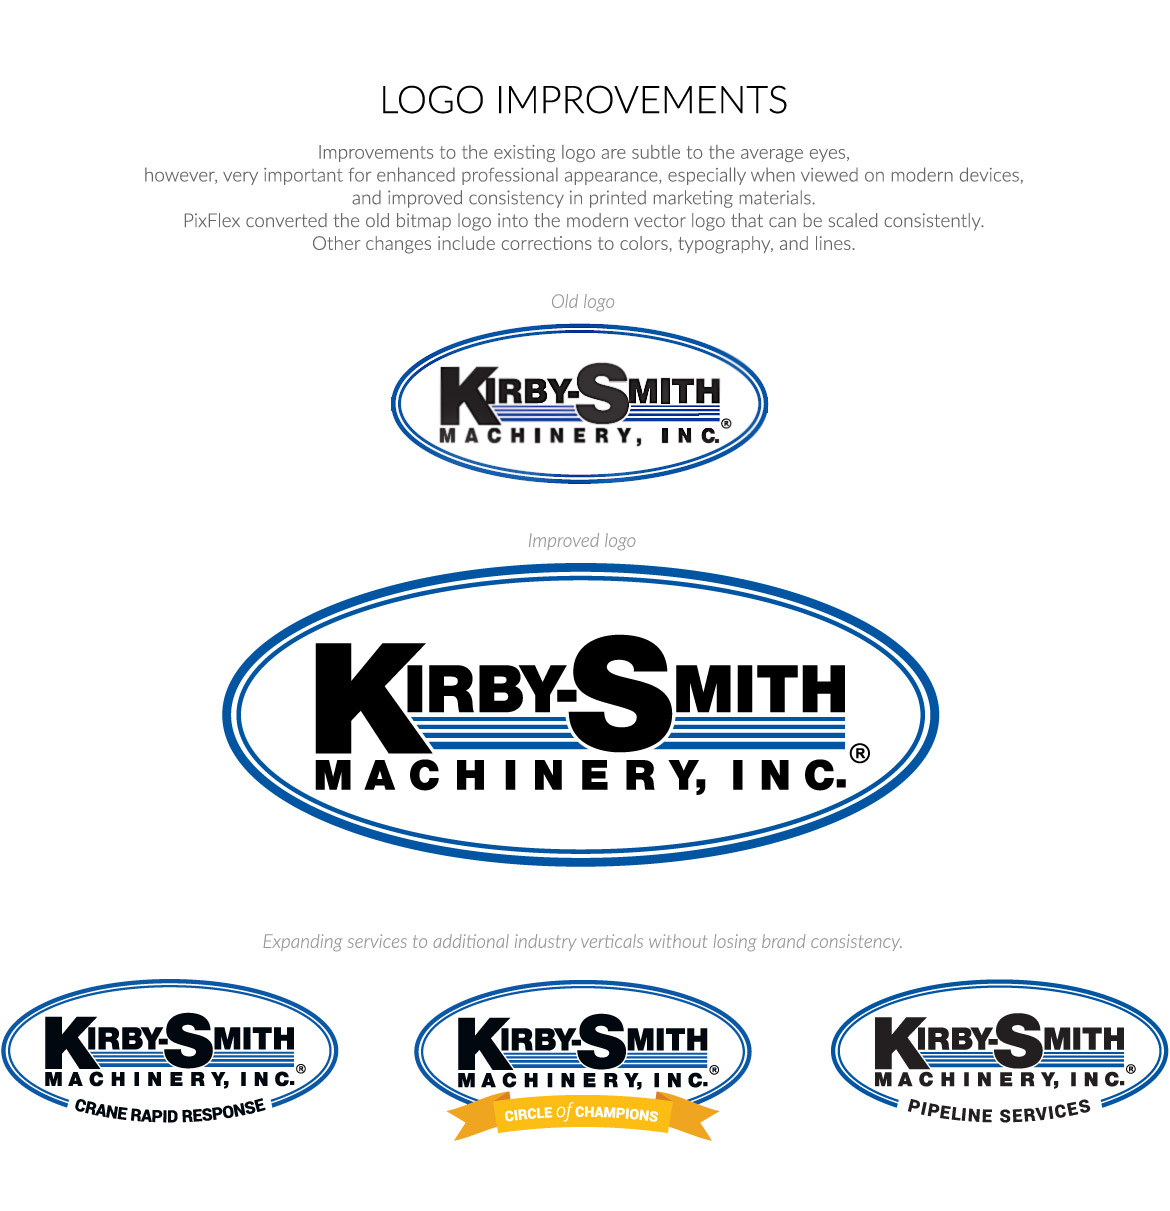 Website design for Kirby Smith Machinery, Inc.